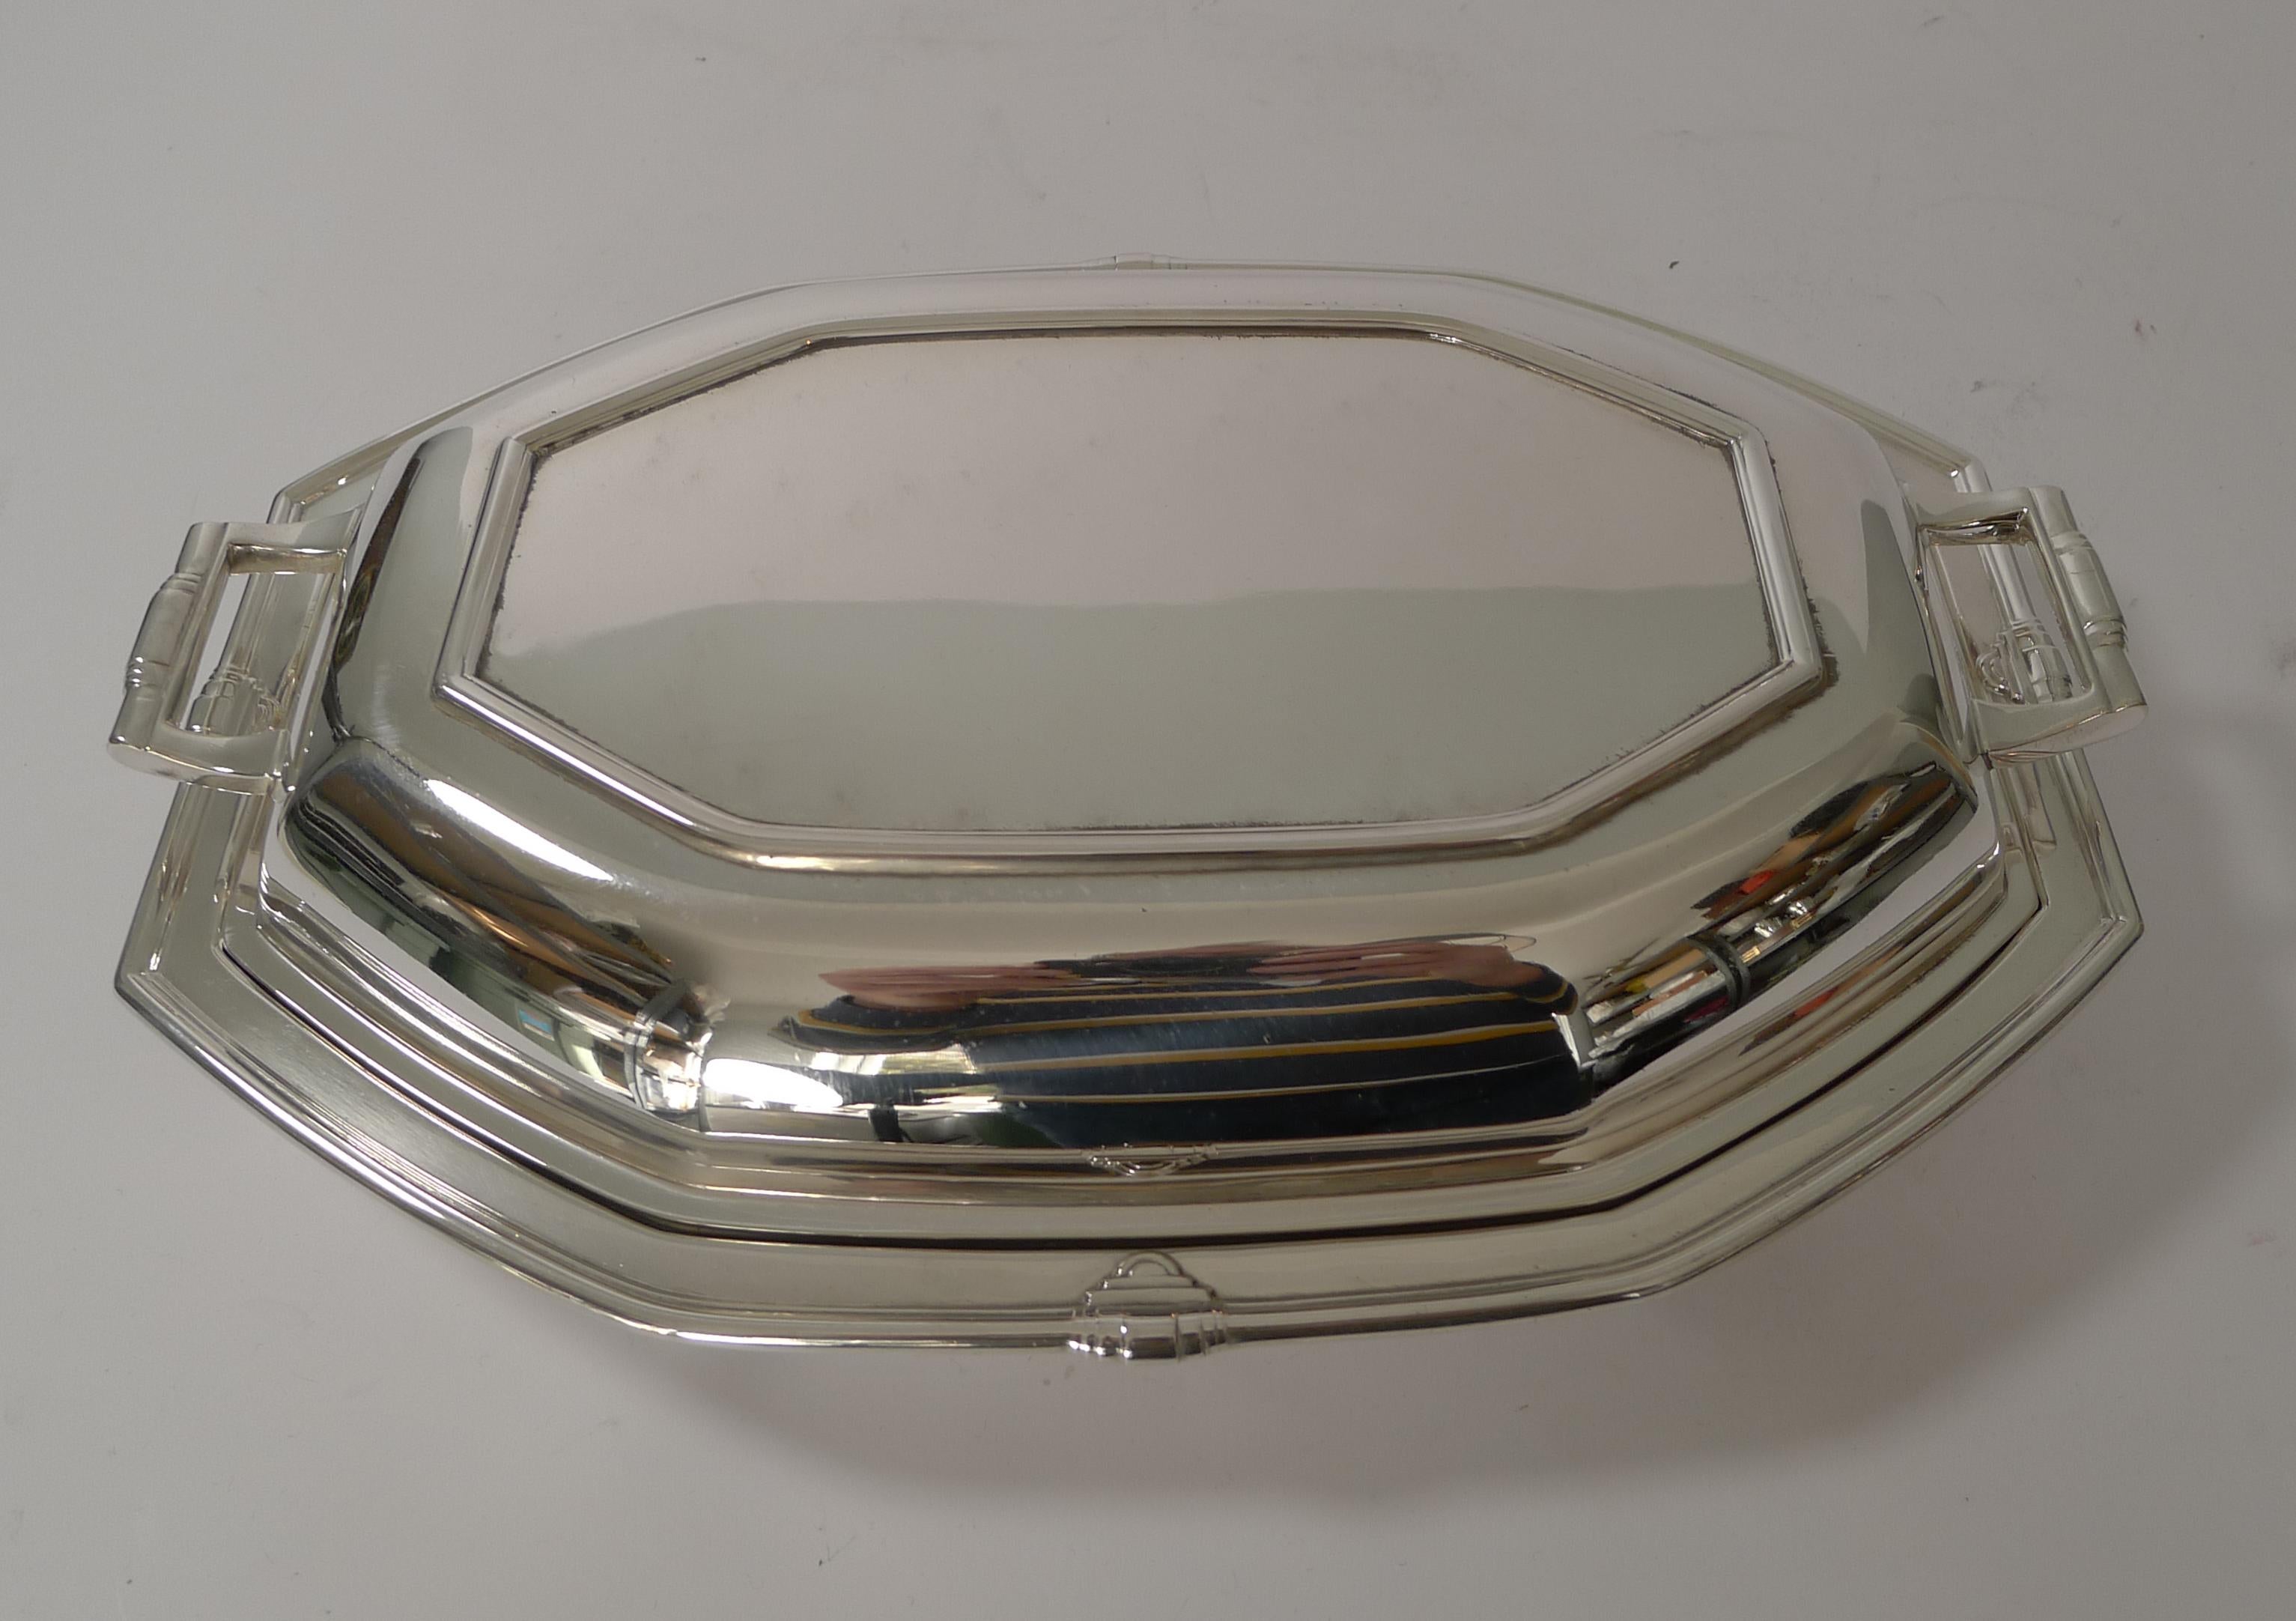 Art Deco Silver Plated Entree / Serving Dish by Frank Cobb & Co. 2